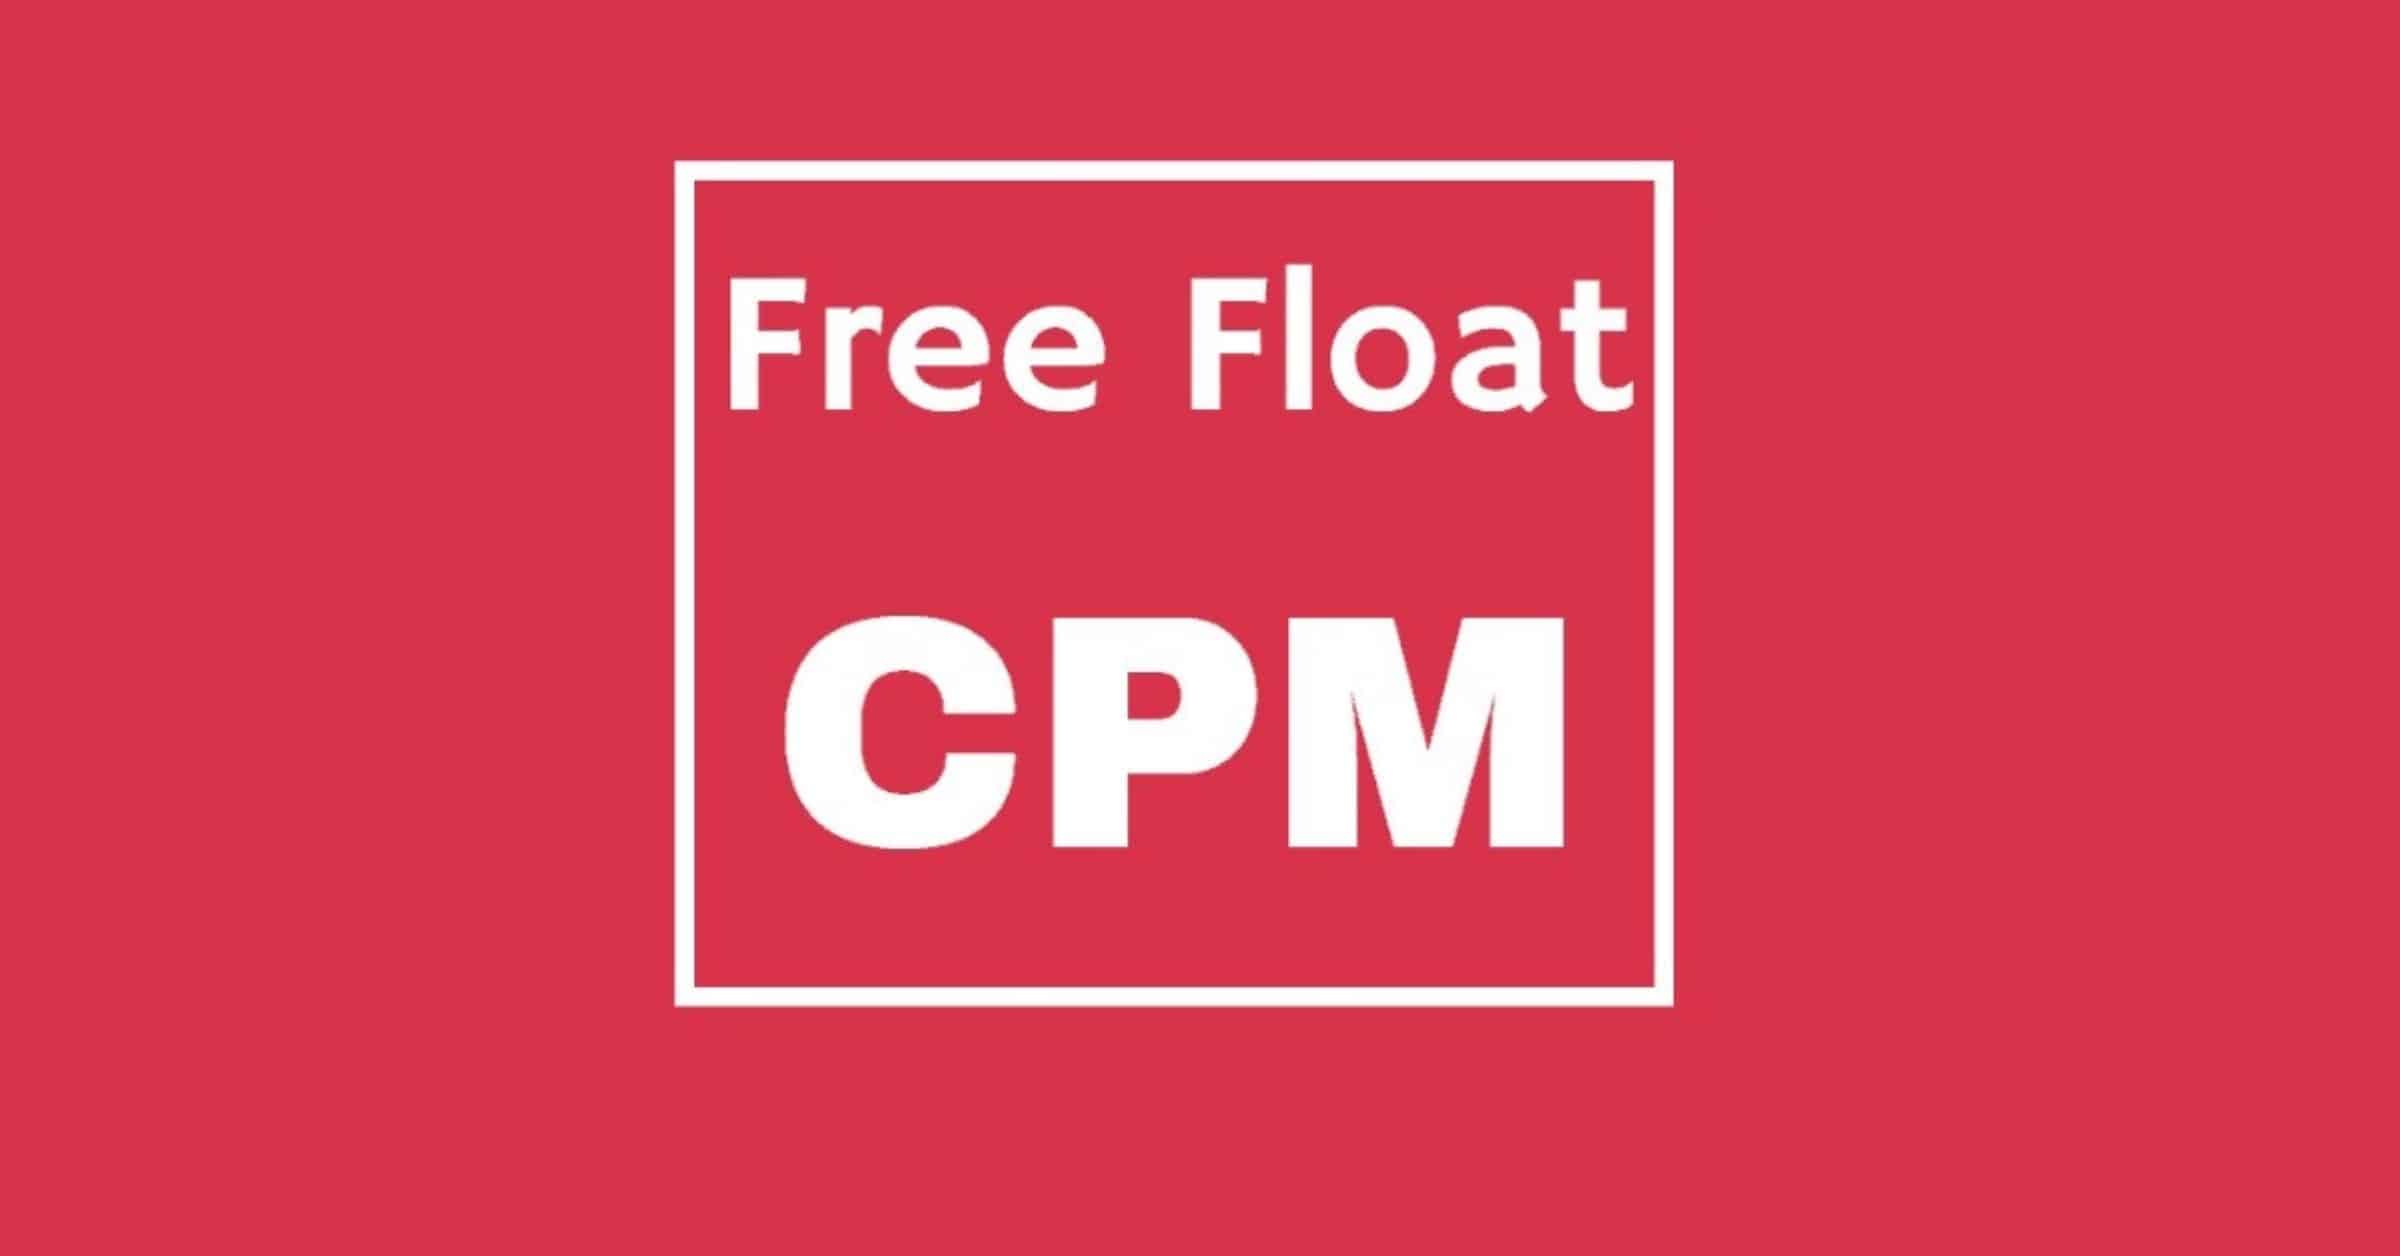 The Free Float CPM